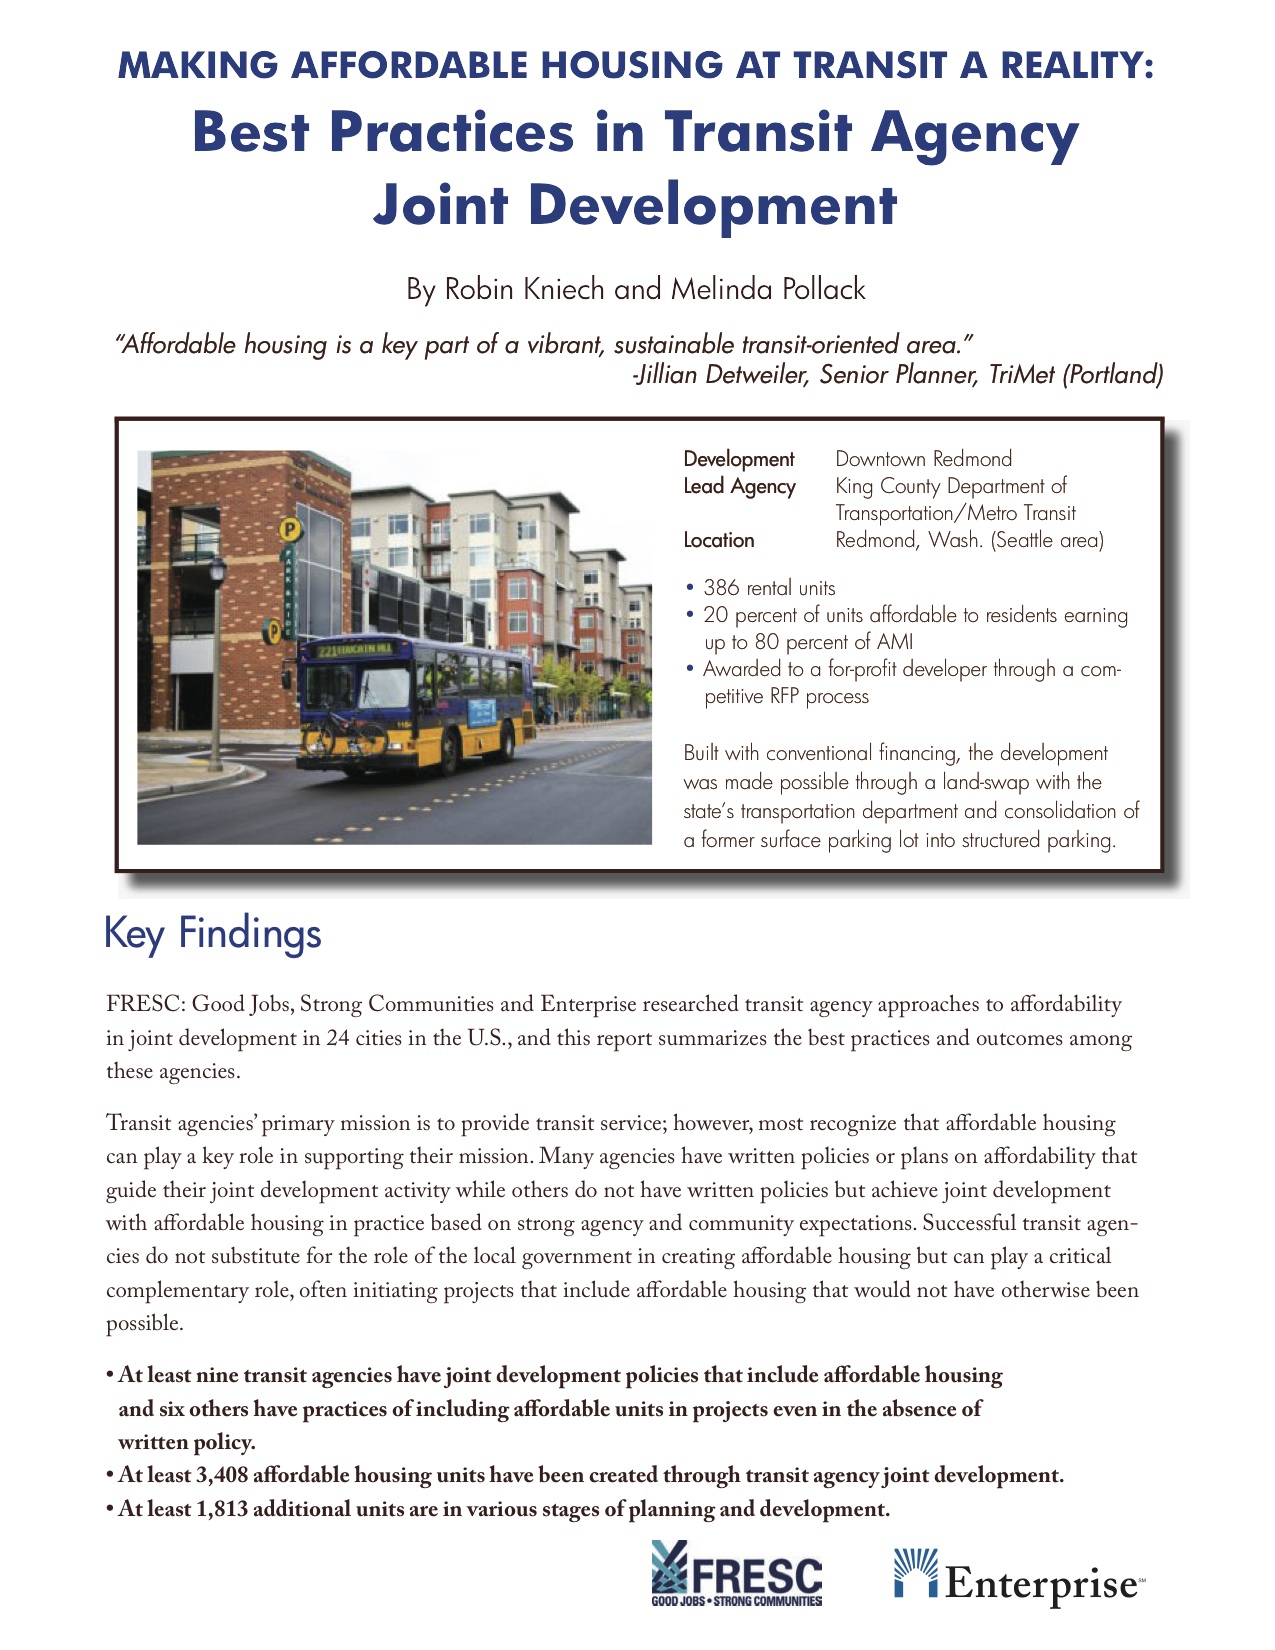 Making Affordable Housing at Transit a Reality: Best Practices in Transit Agency Joint Development